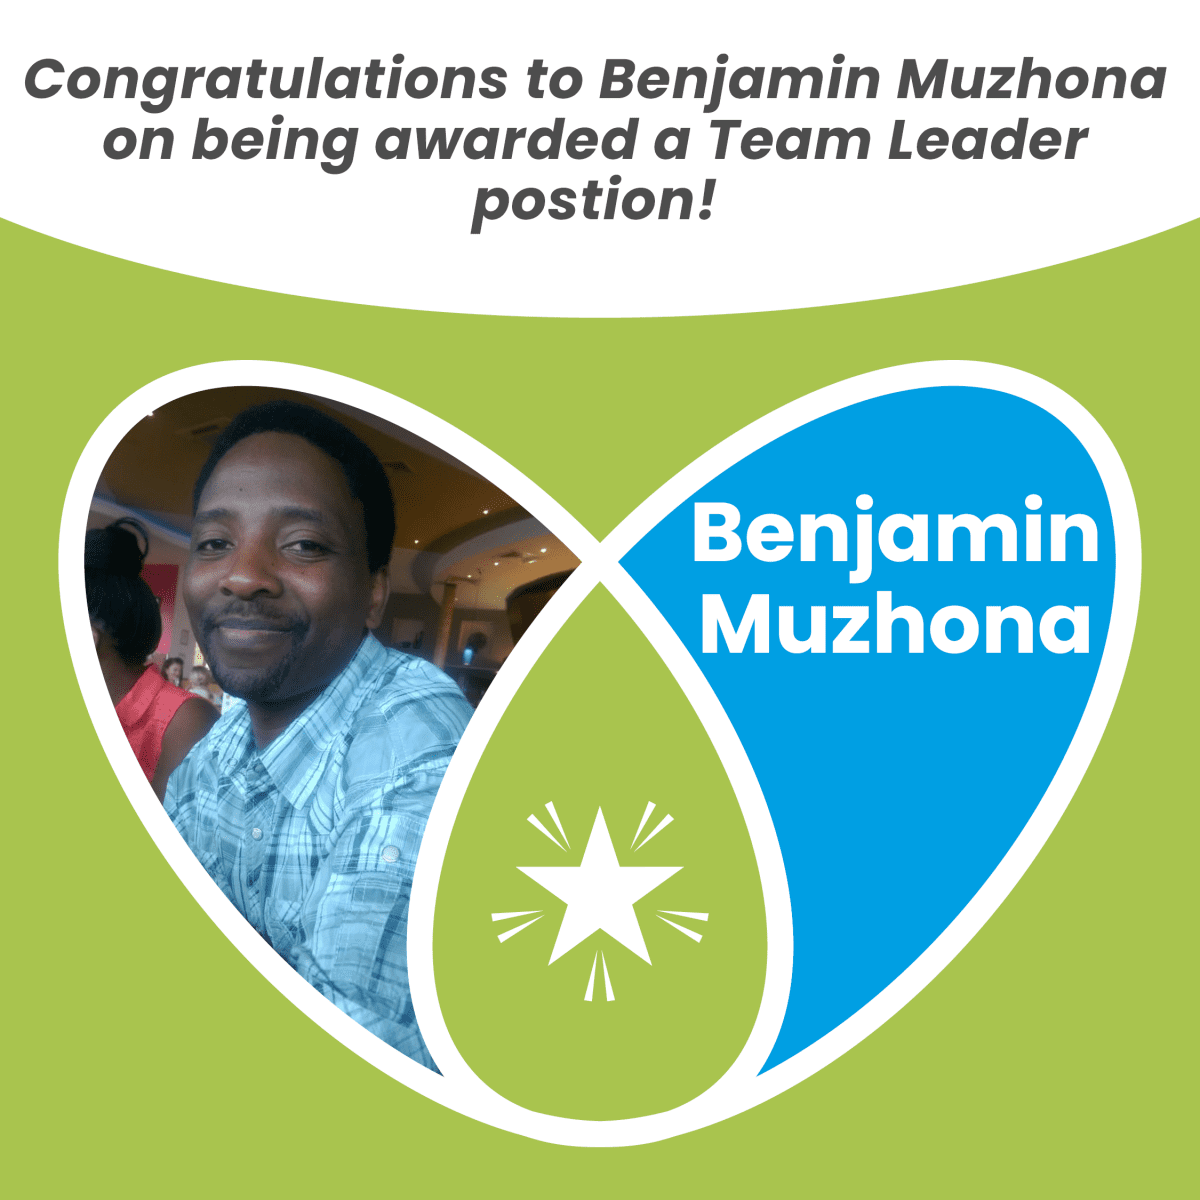 Congratulations to Benjamin Muzhona on successfully being awarded a Team Leader position!